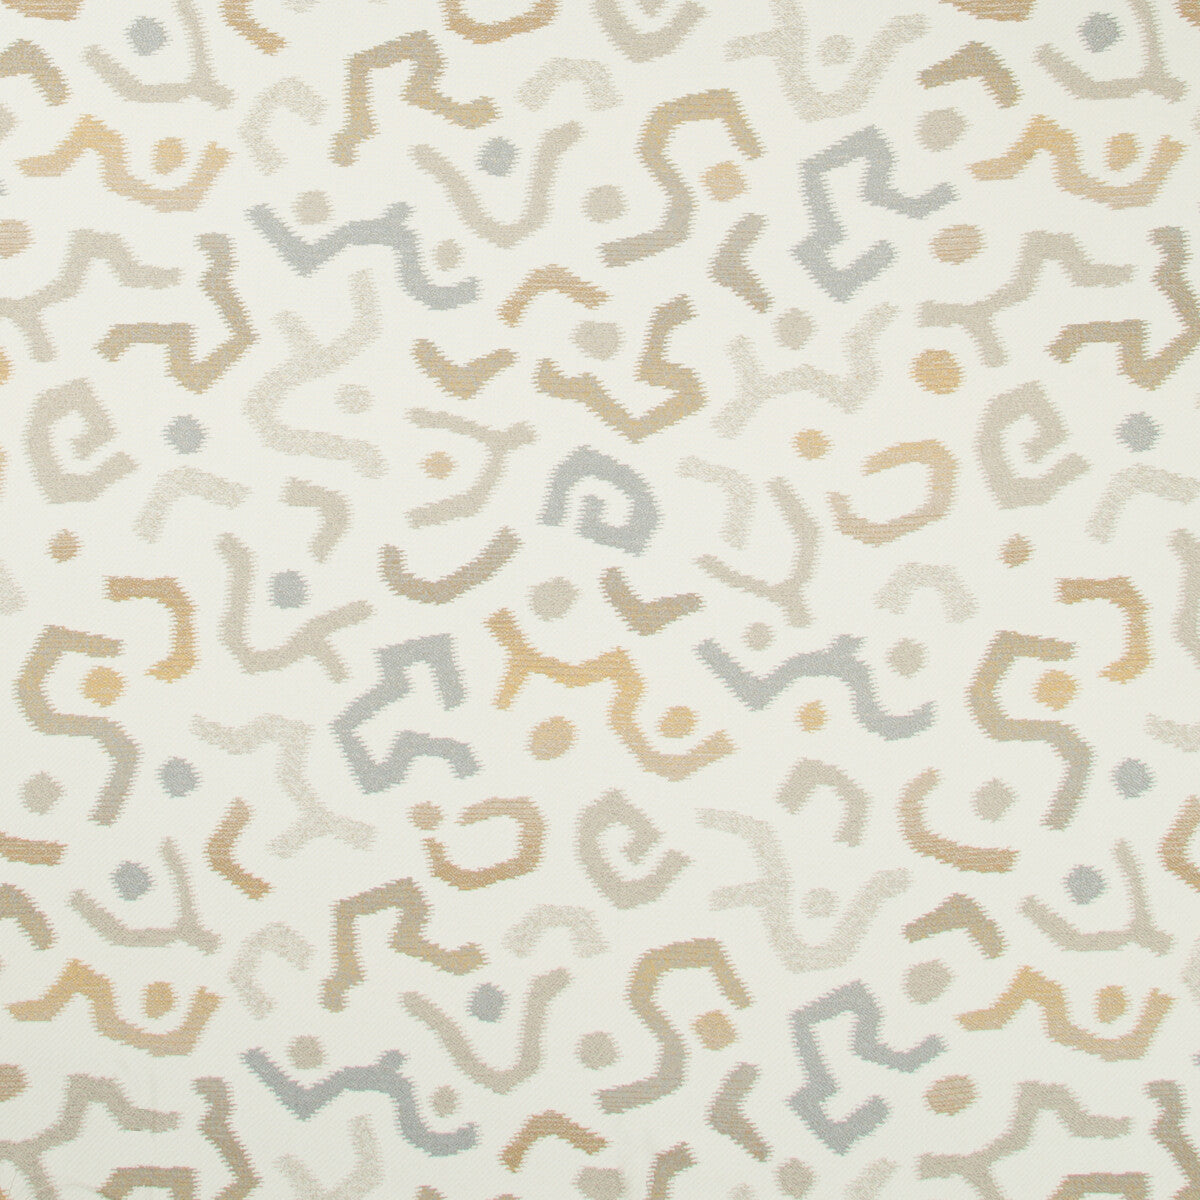 Mahe fabric in pebble color - pattern 34884.1614.0 - by Kravet Design in the Oceania Indoor Outdoor collection